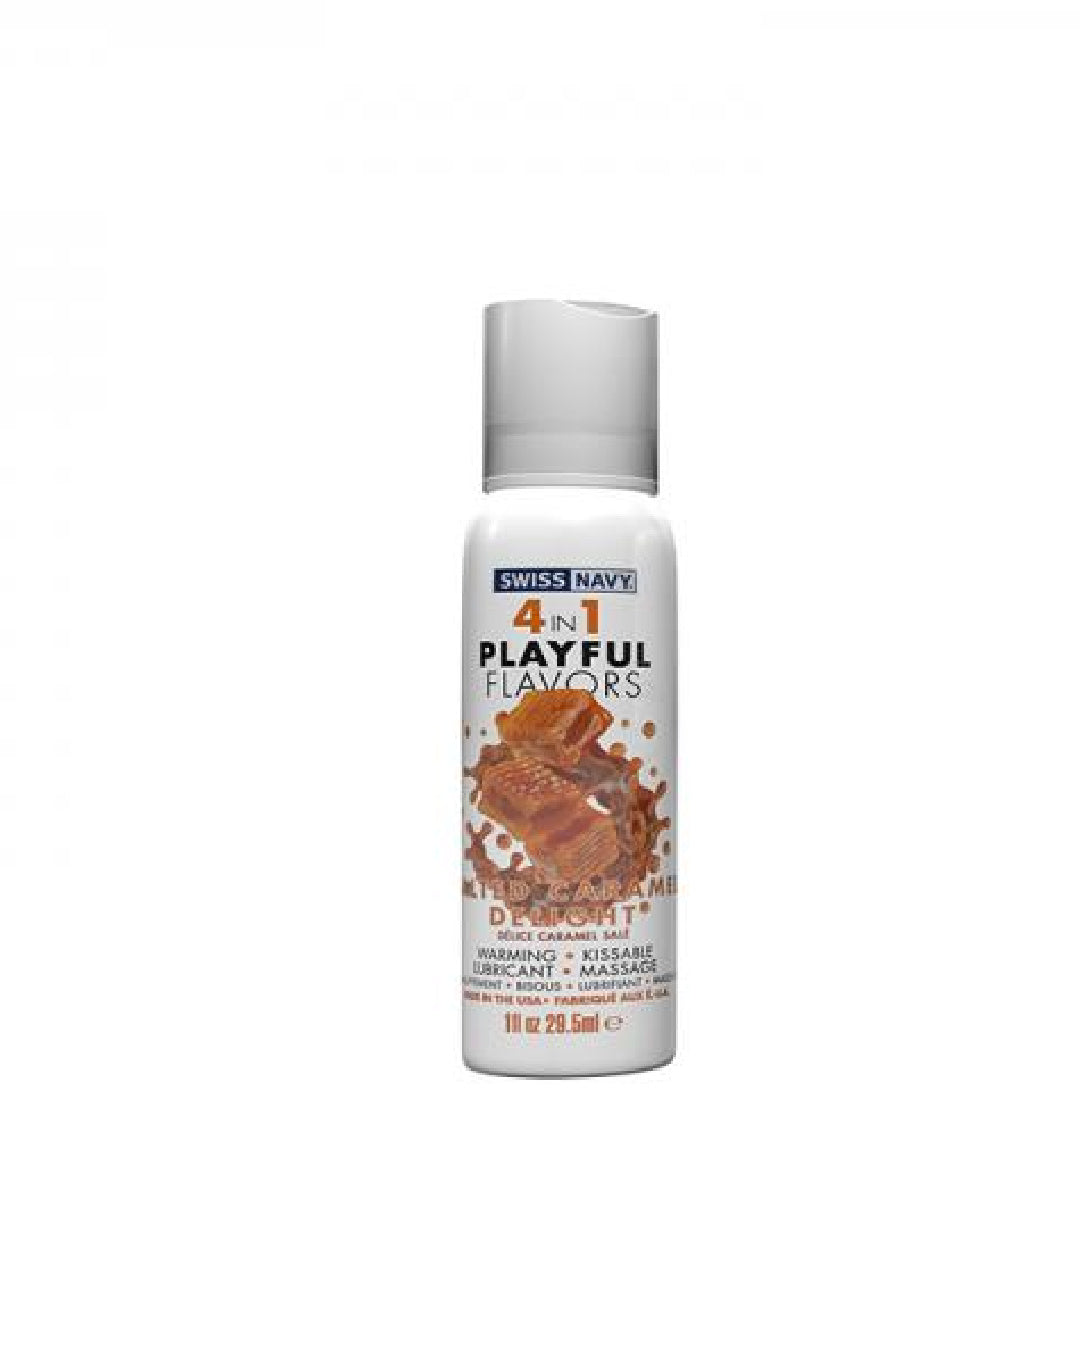 Playful Flavors Salted Caramel Delight 4 in 1 Warming Lubricant 1 oz bottle 